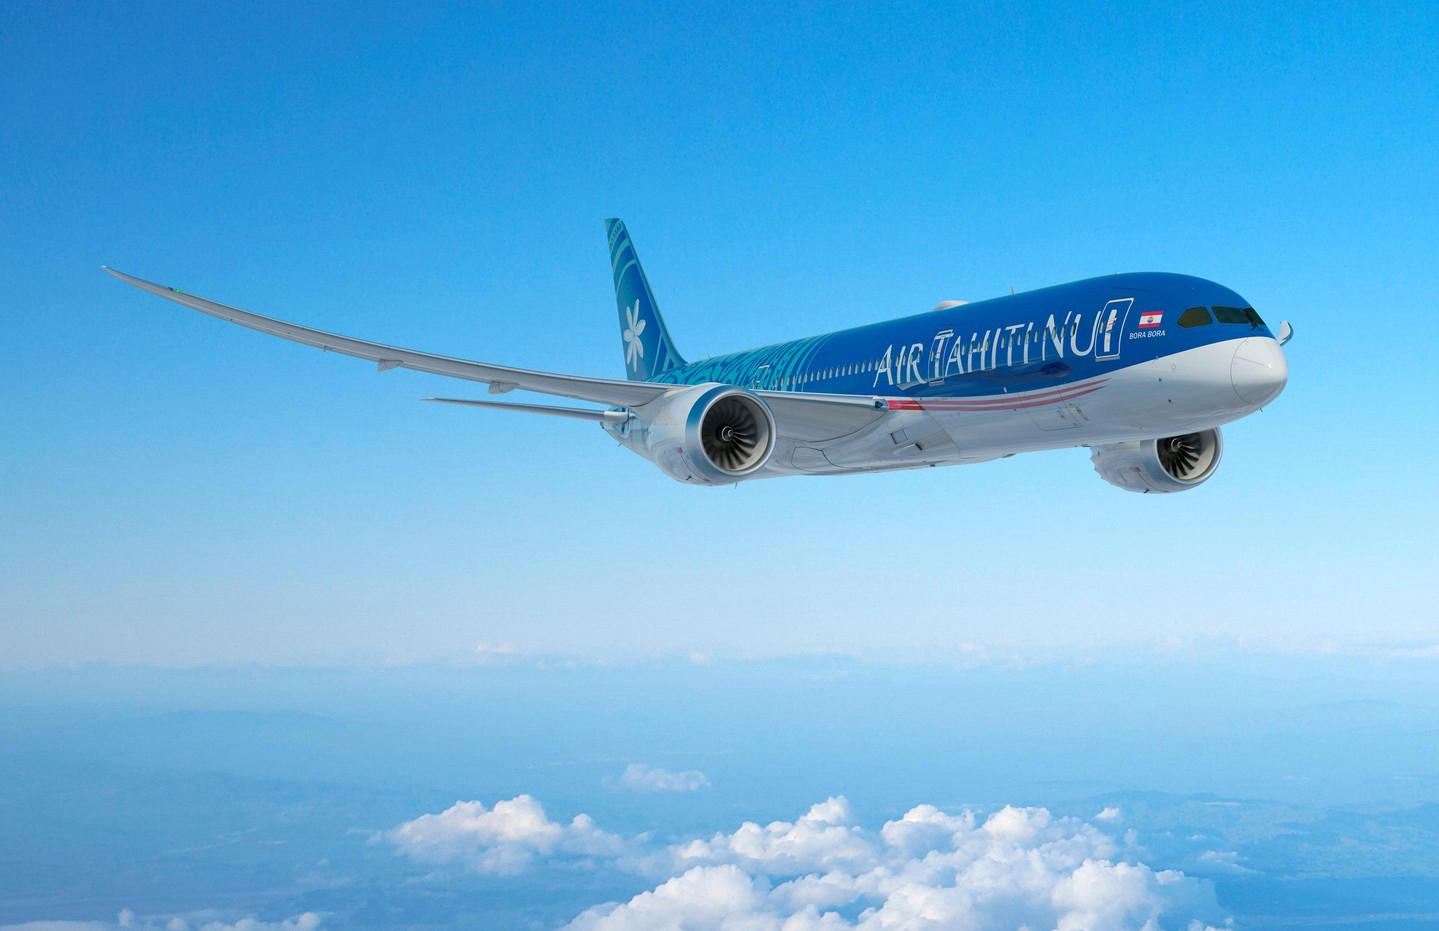 image  1 The Boeing Company - Welcome to Seattle, #airtahitinui